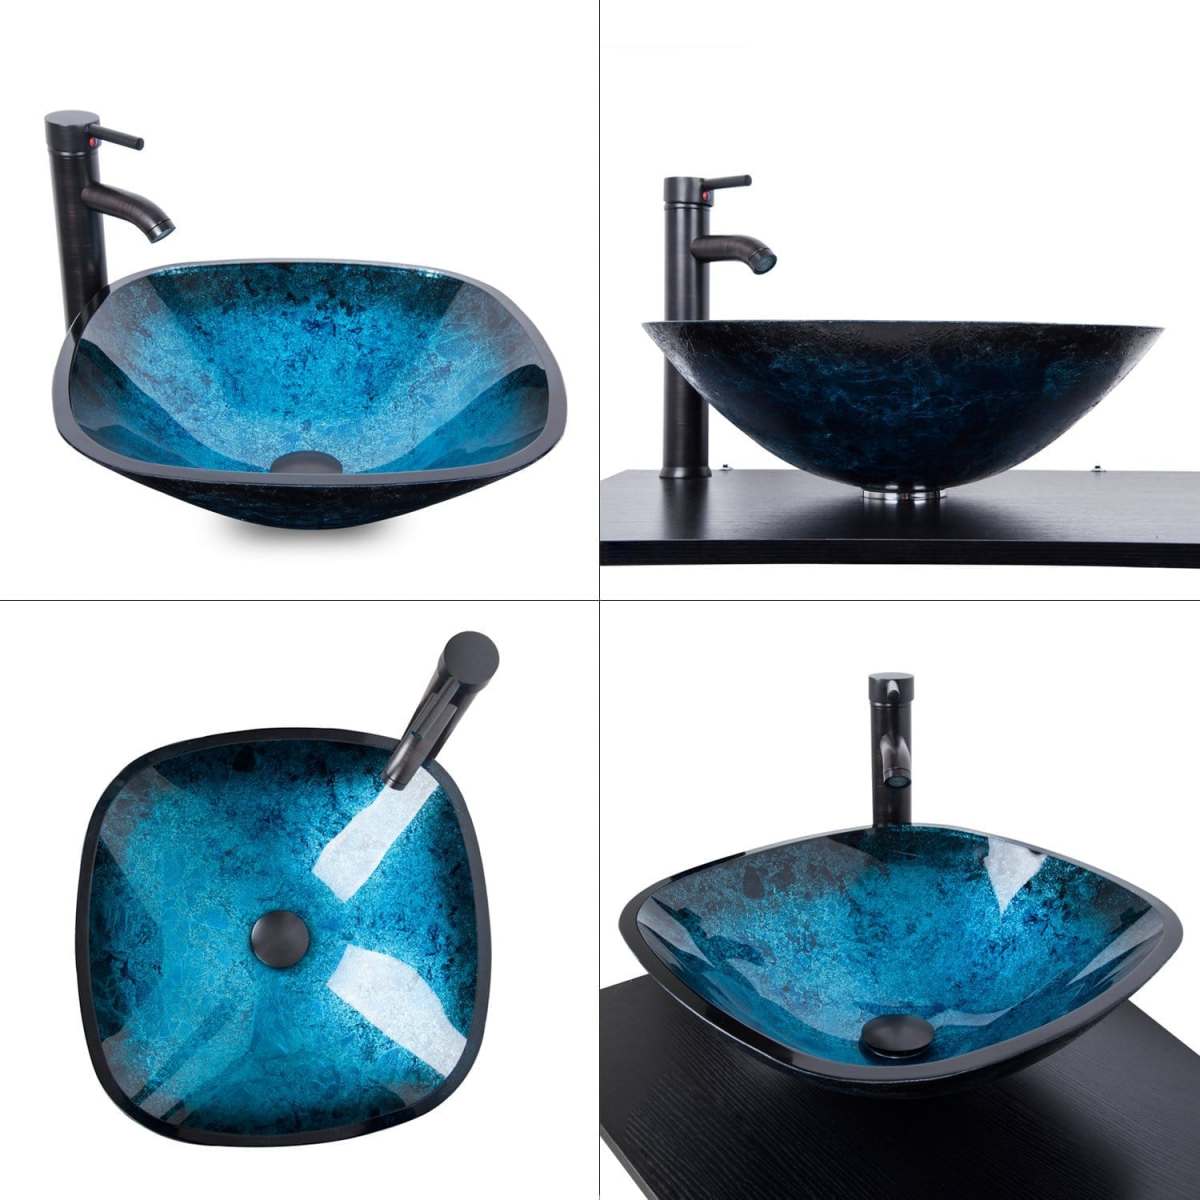 Four angle views of Elecwish Blue Square Sink